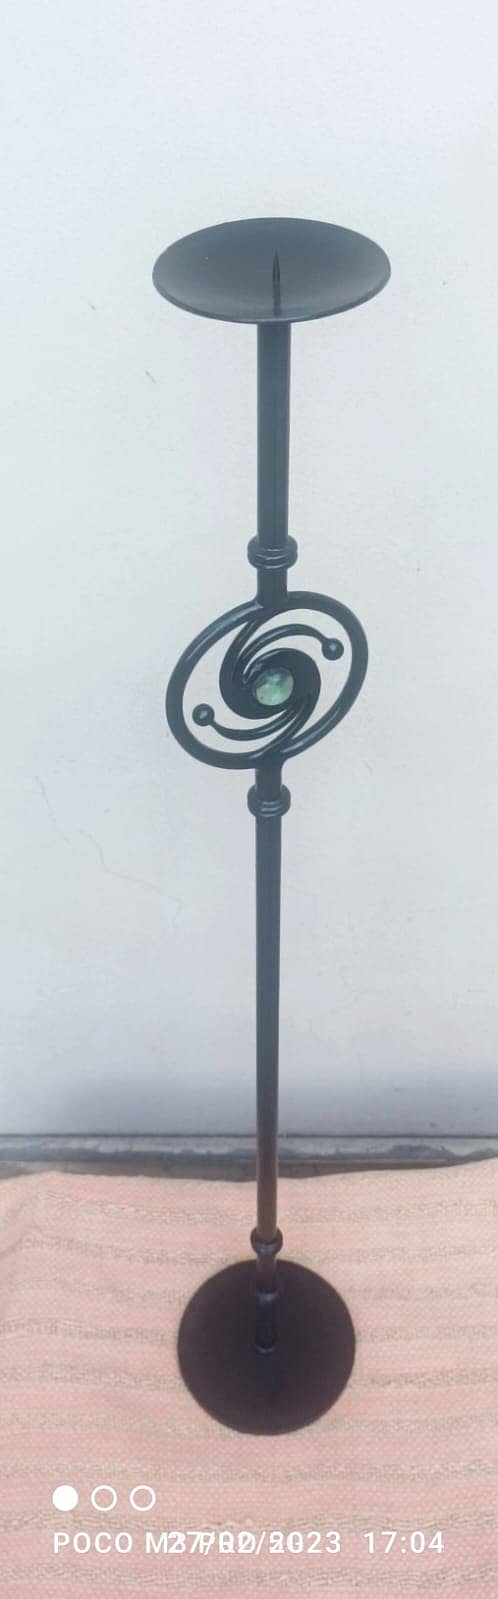 Steel / Wrought Iron Candle Stands on sale 8